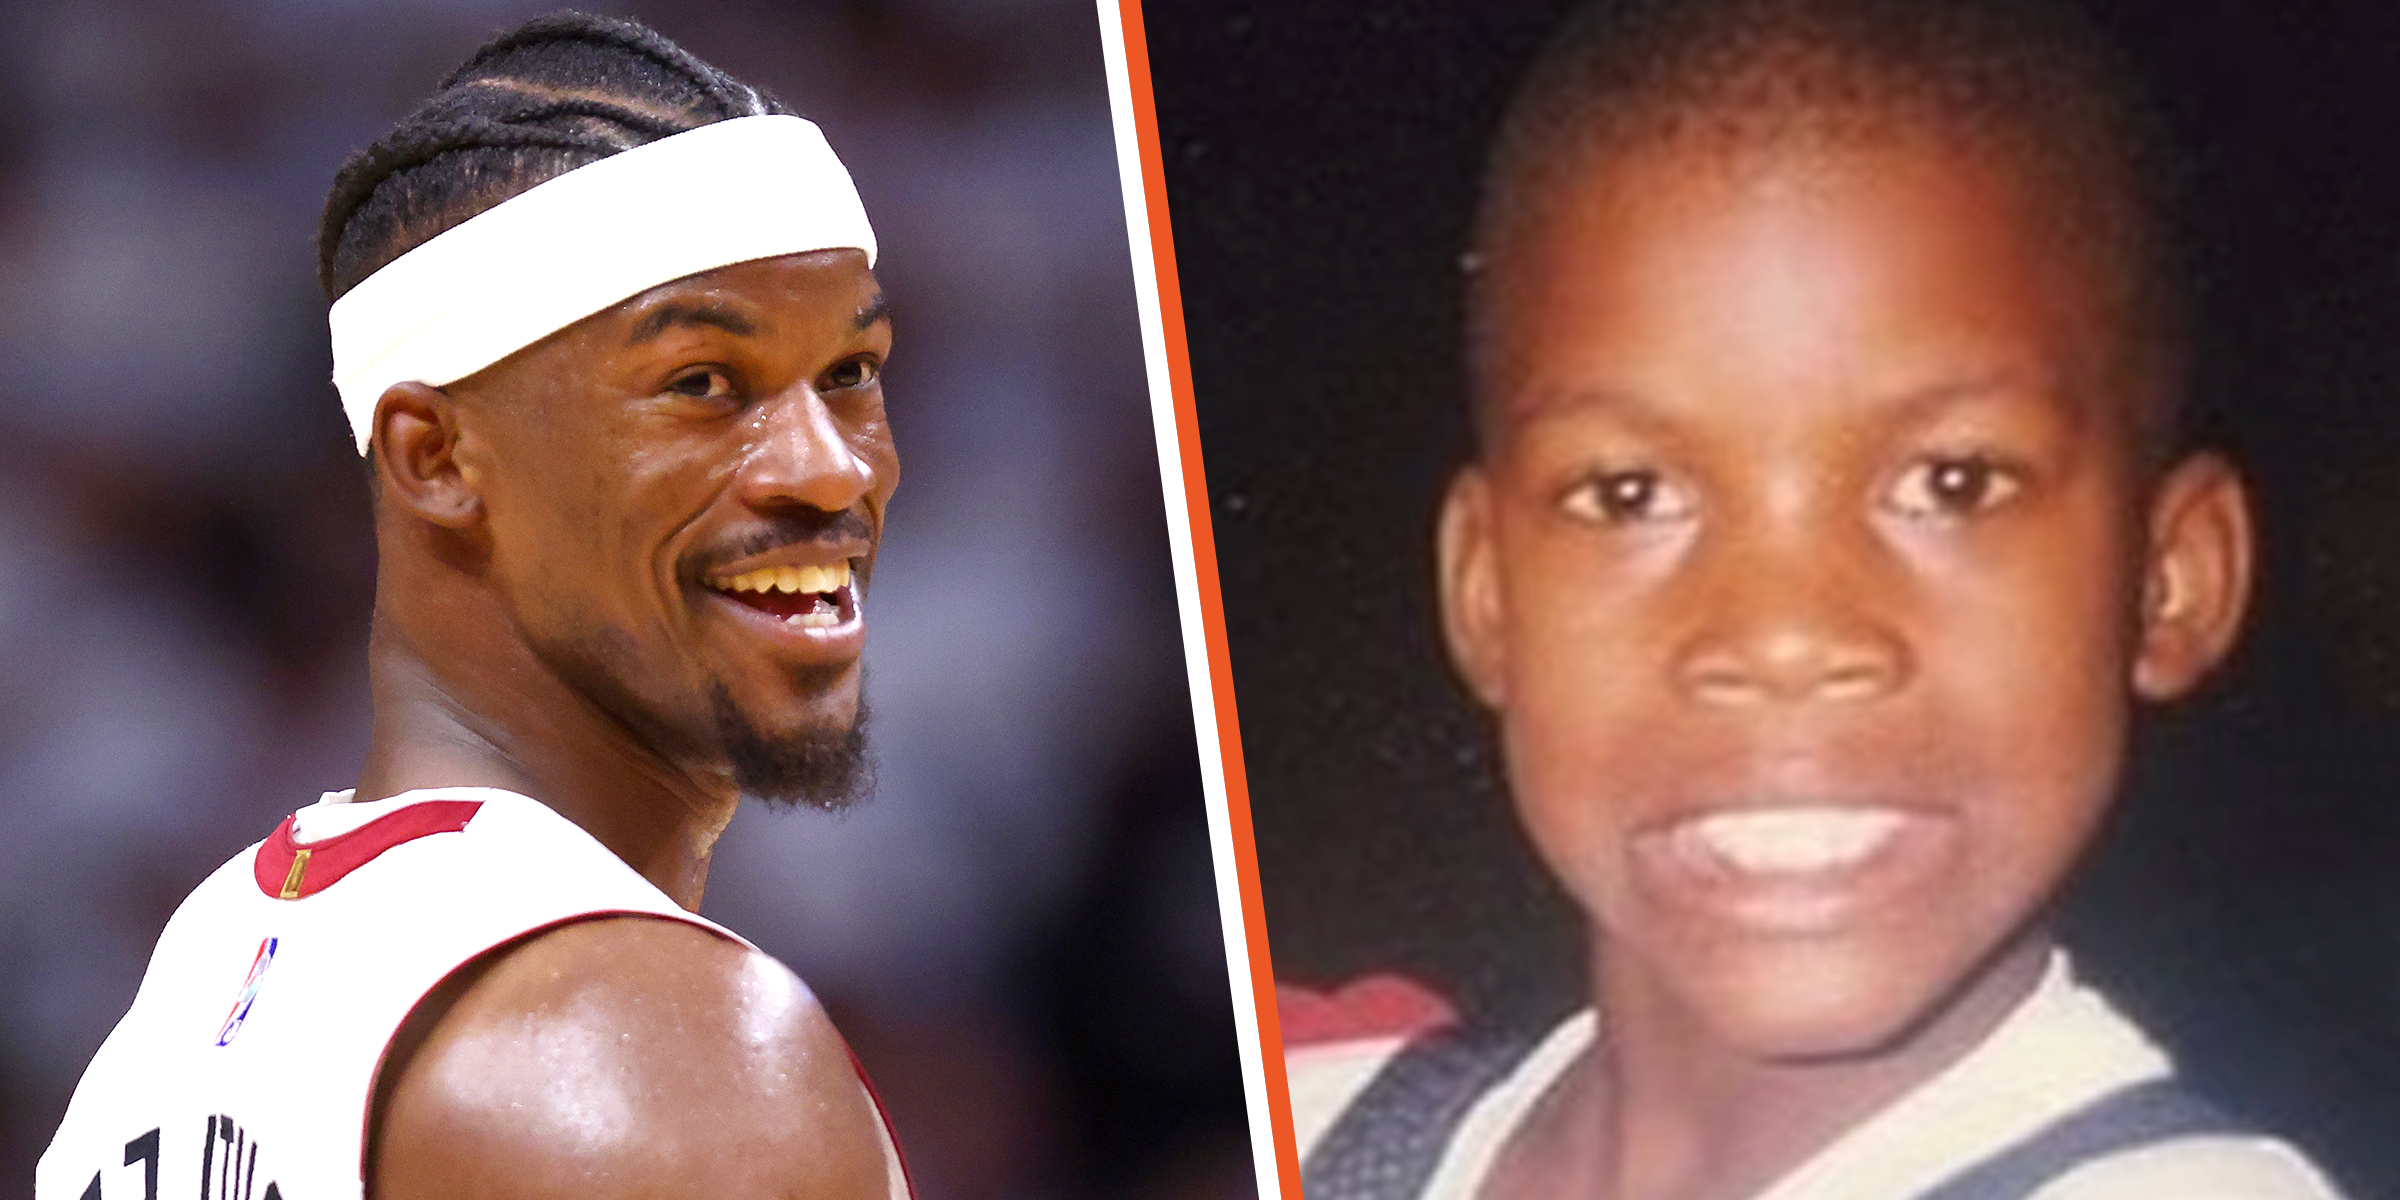 Jimmy Butler III, 2022 | Jimmy Butler as a child | Source: Getty Images | Instagram/jimmybutler